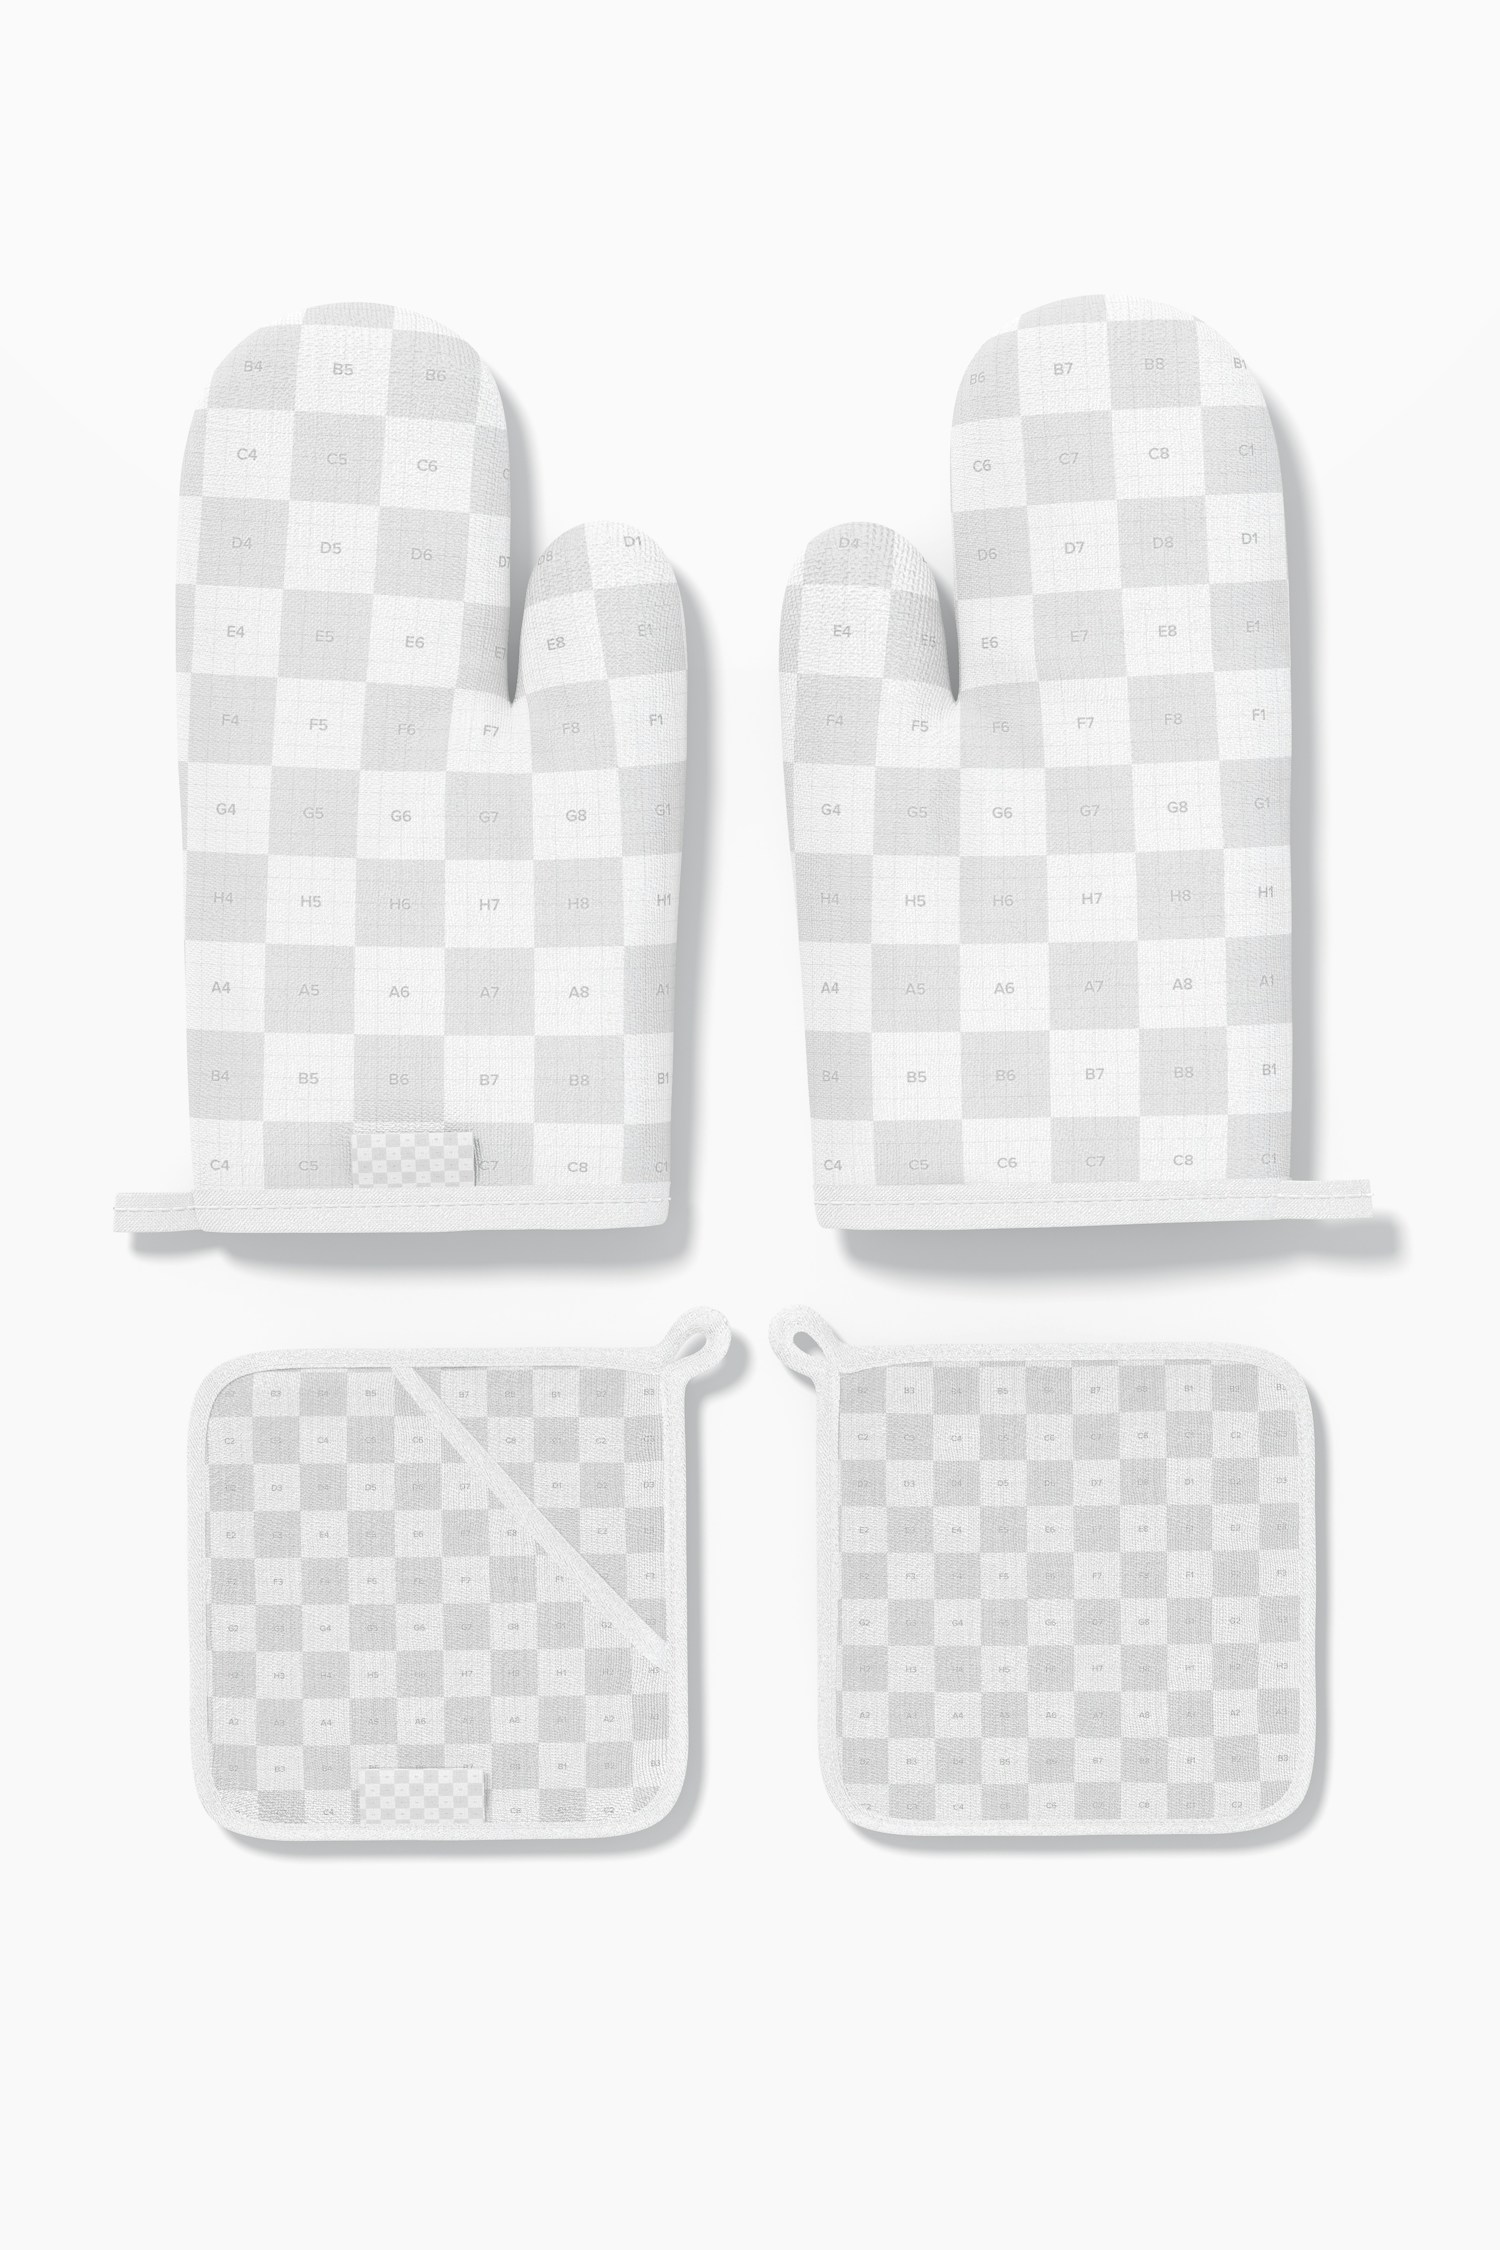 Oven Mitts and Potholders Mockup, Top View